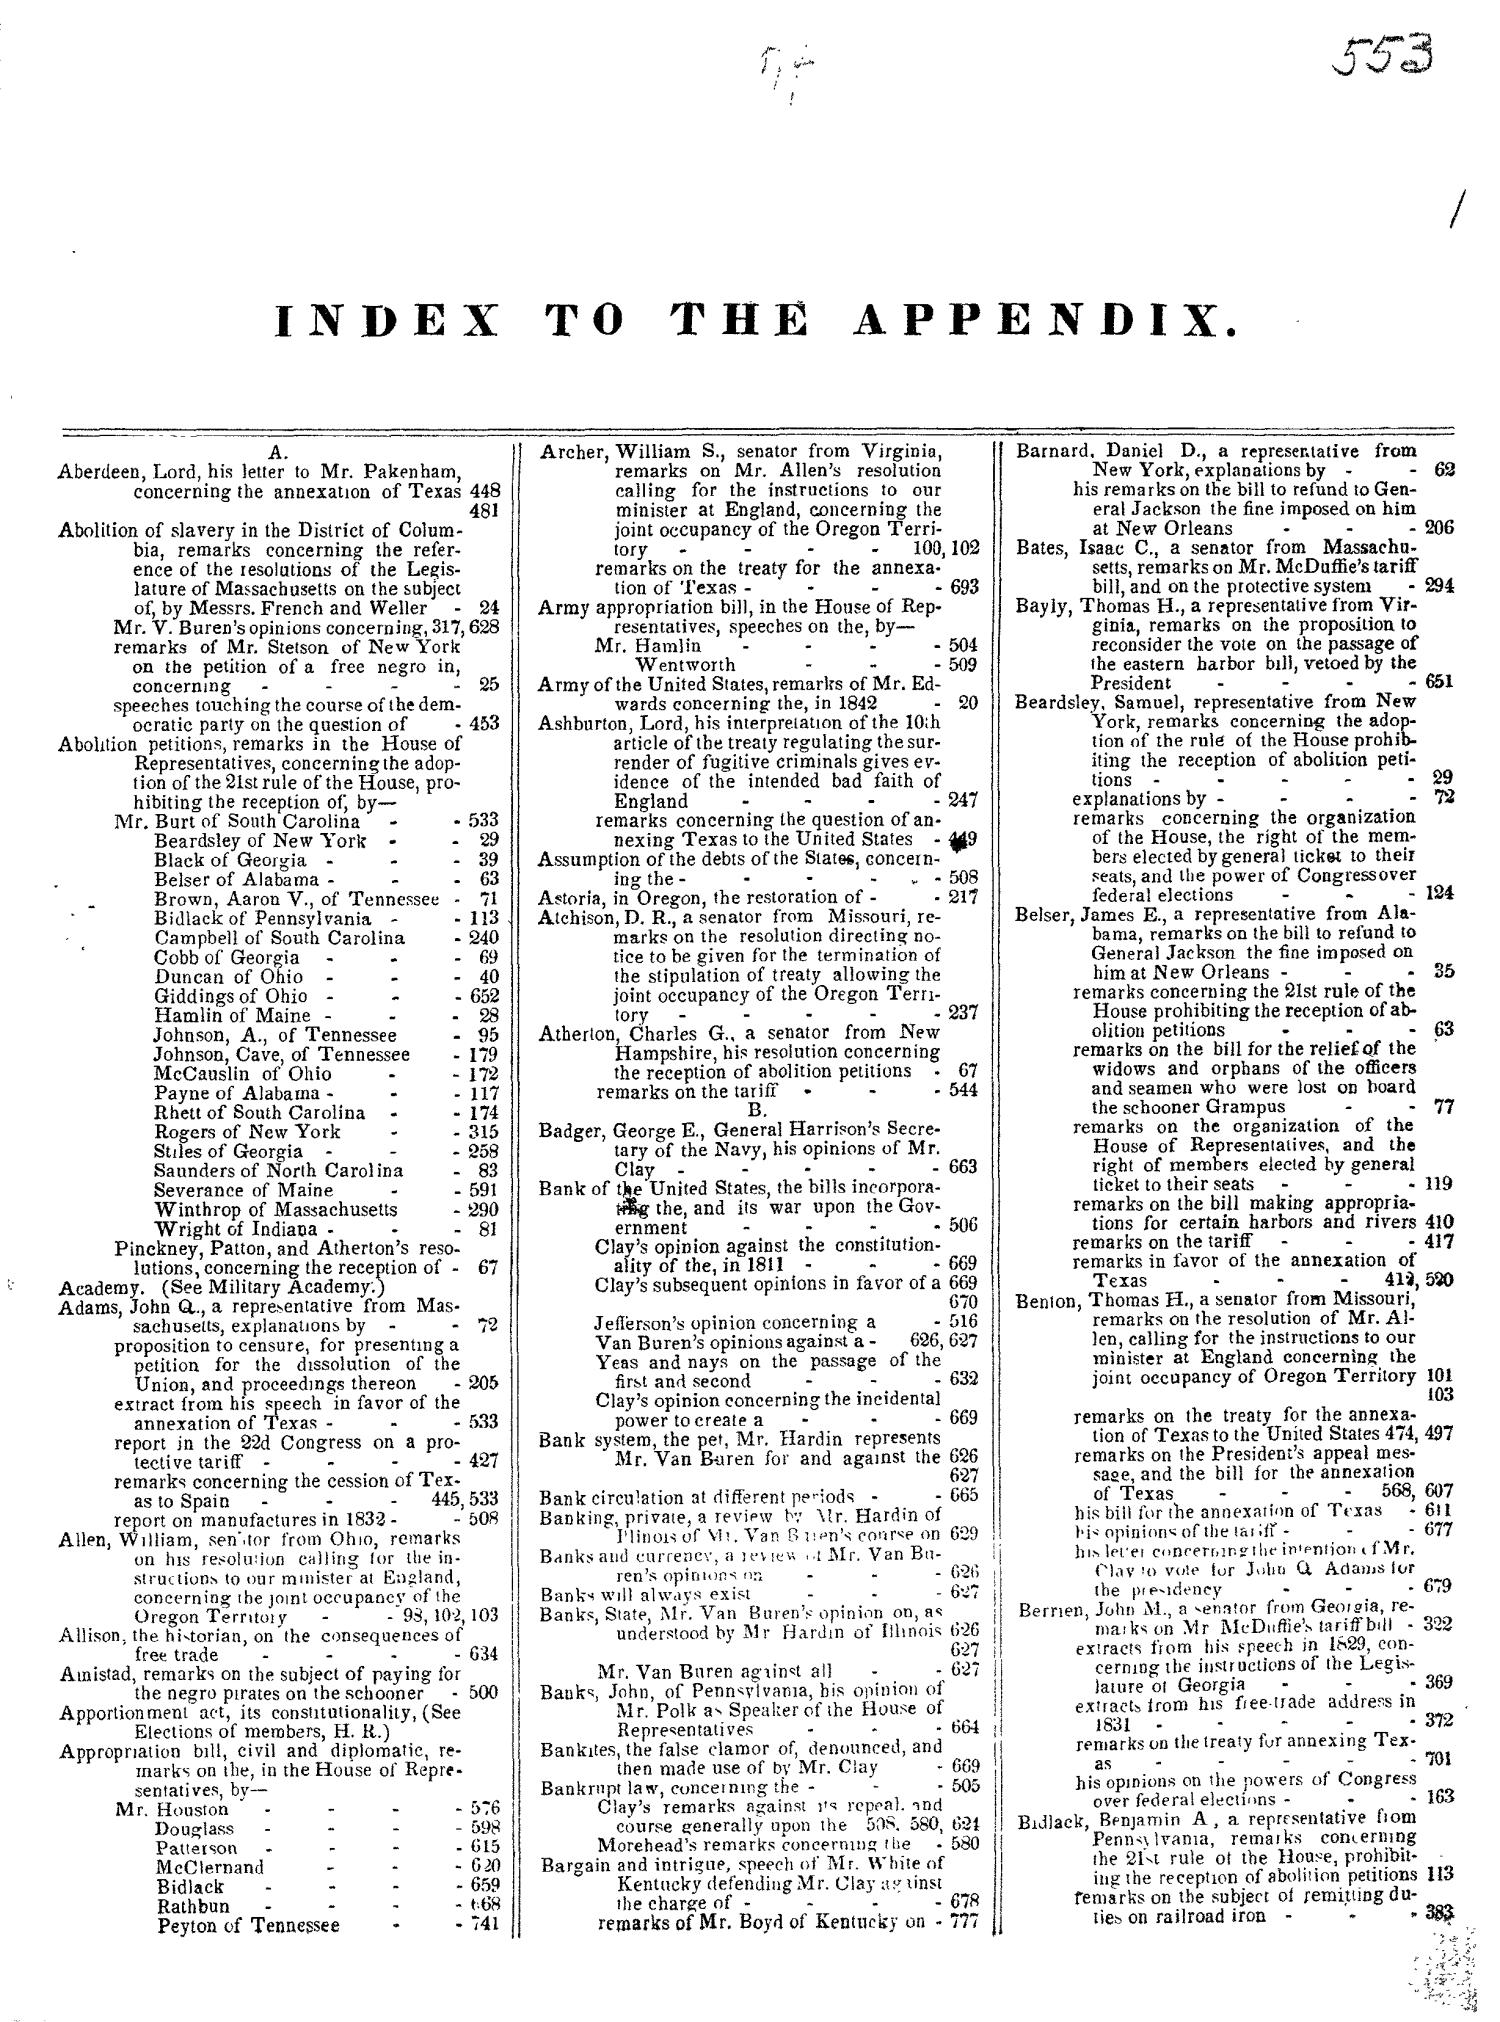 The Congressional Globe, Volume 13, Part 2: Twenty-Eighth Congress, First Session
                                                
                                                    None
                                                